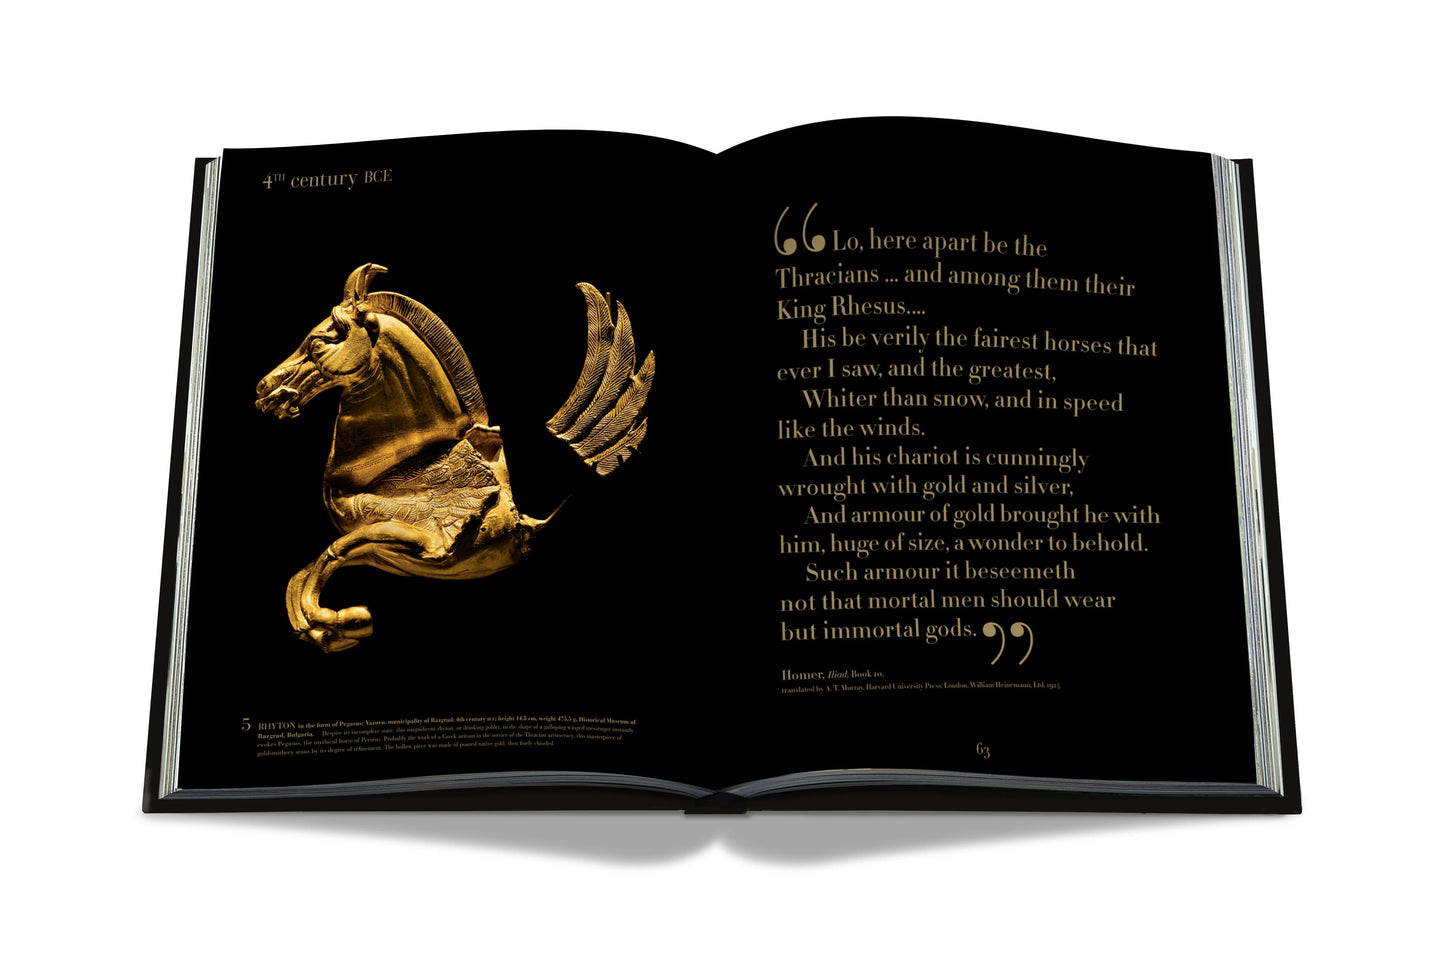 Gold Book: Impossible Collection (Sonderausgabe)